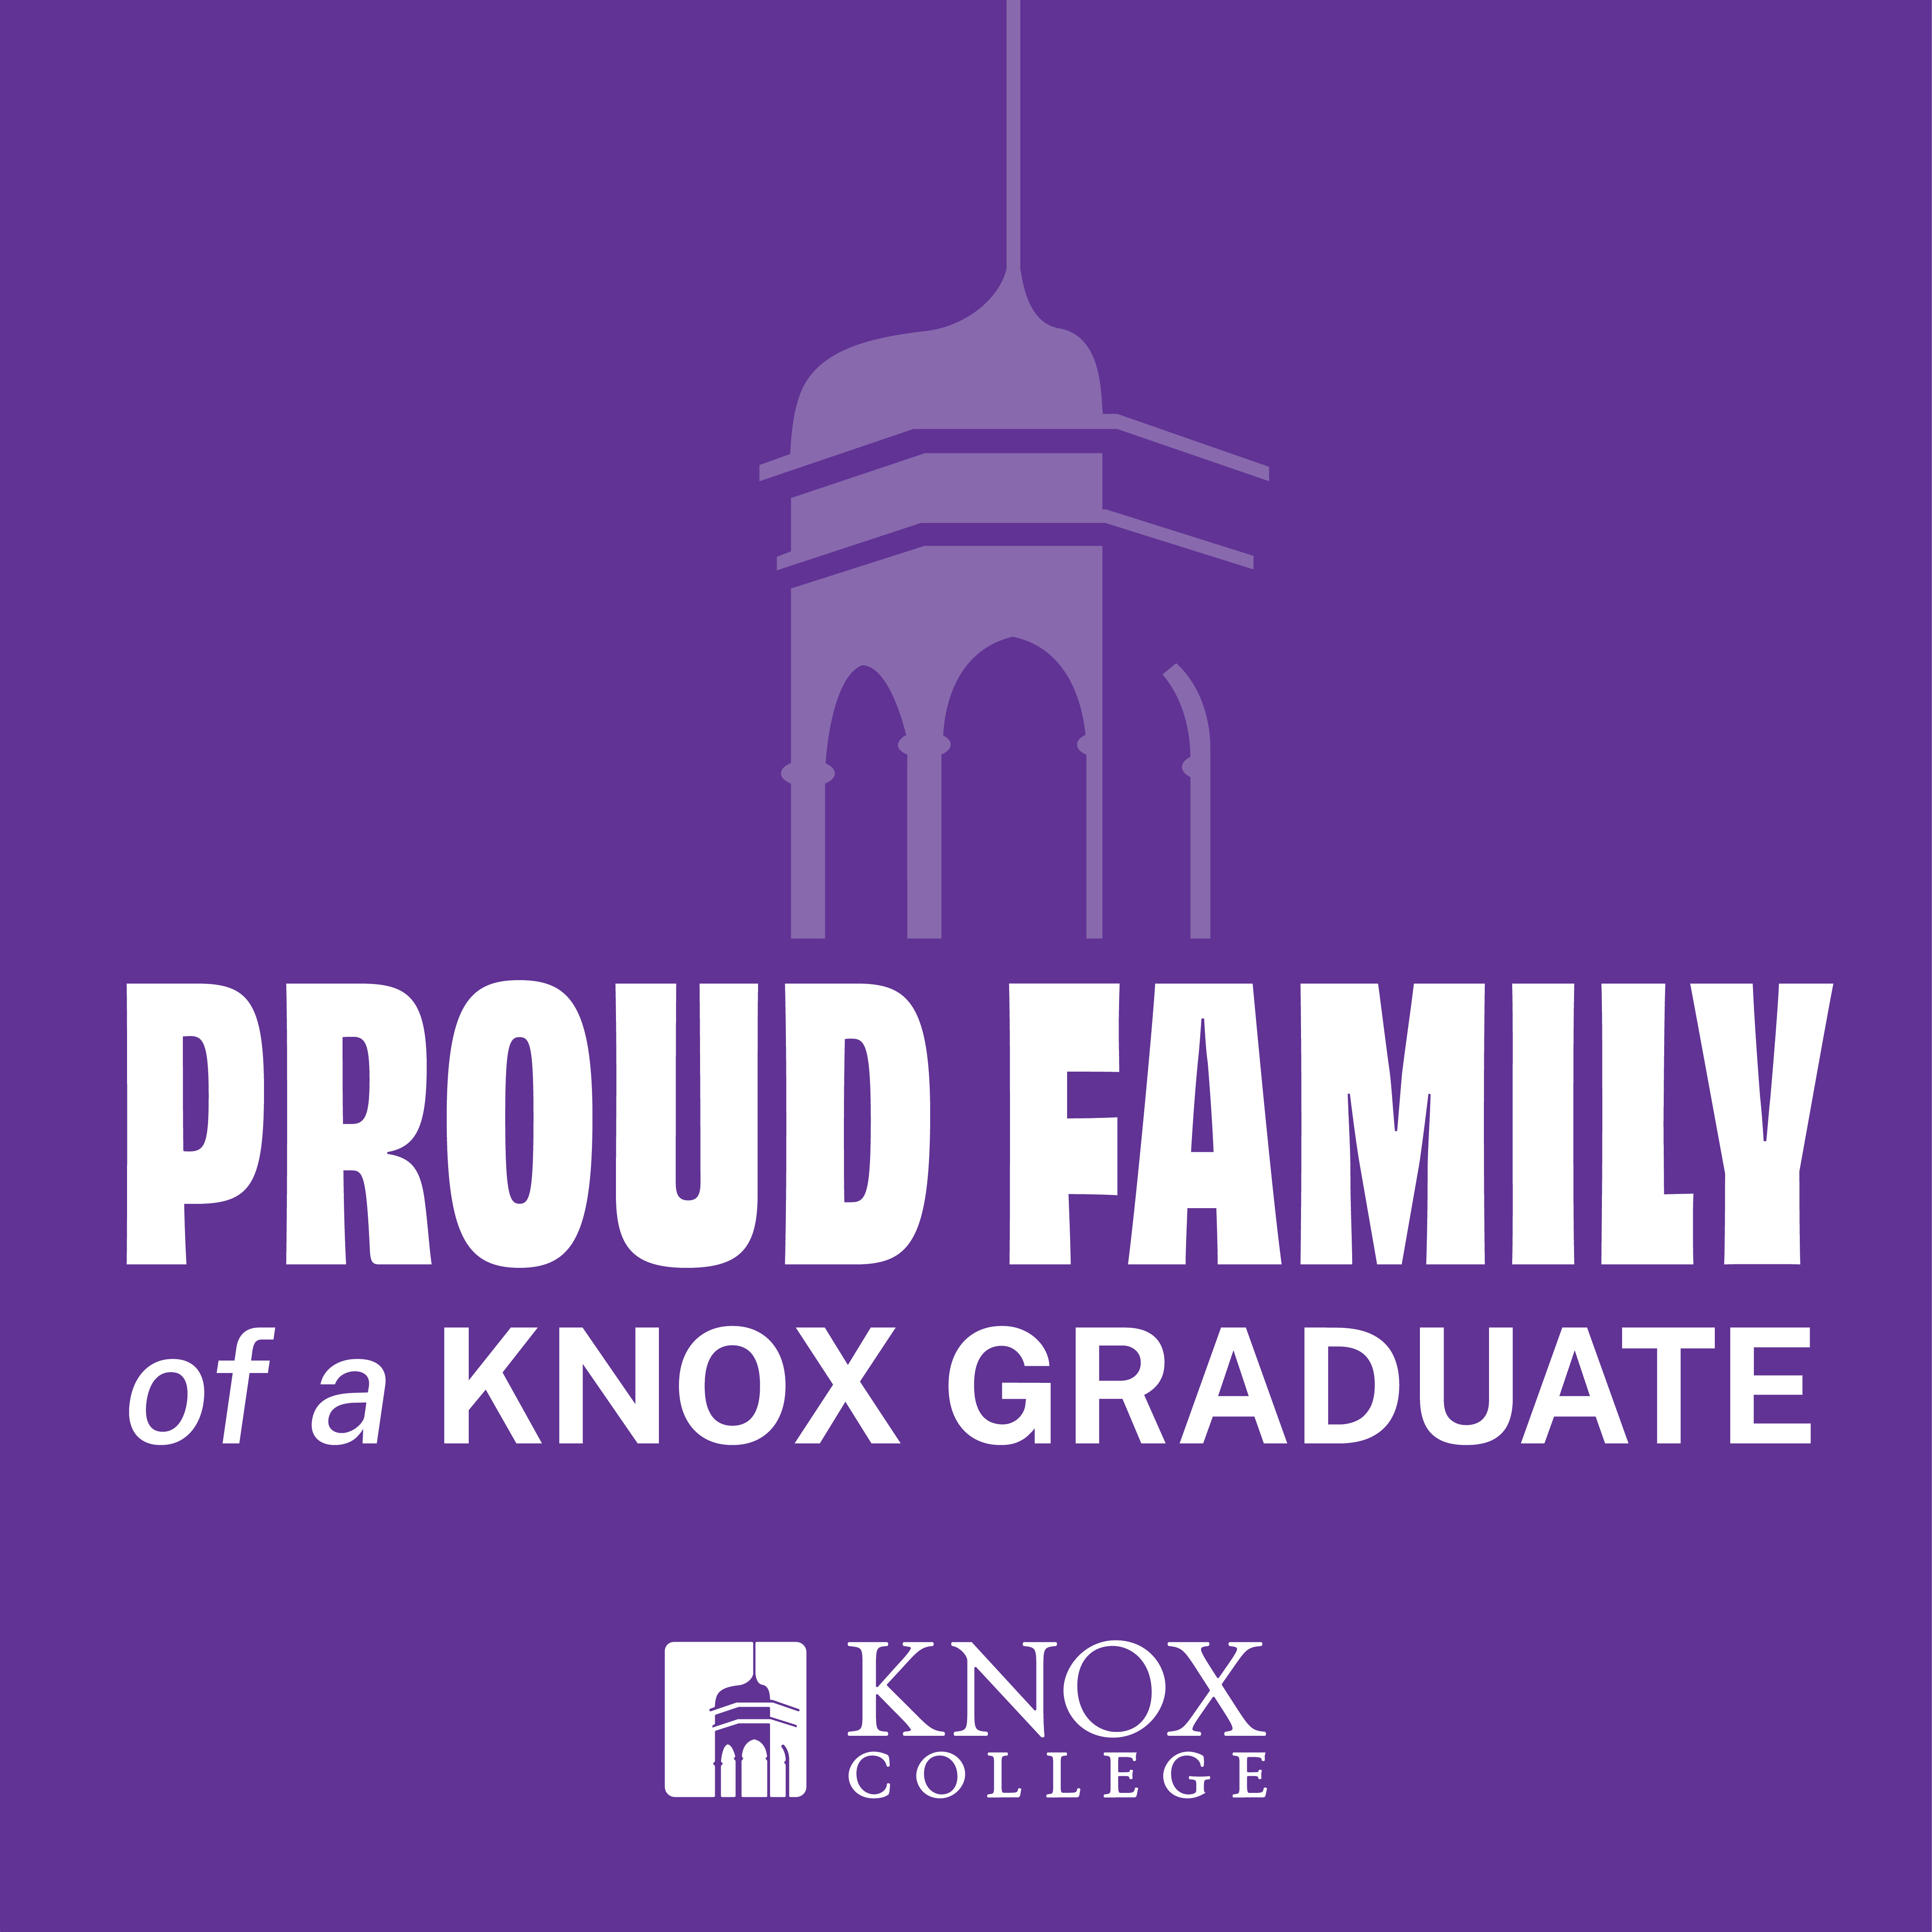 Proud Family of a Knox Graduate in white text over purple background with the Old Main bell tower in the background.